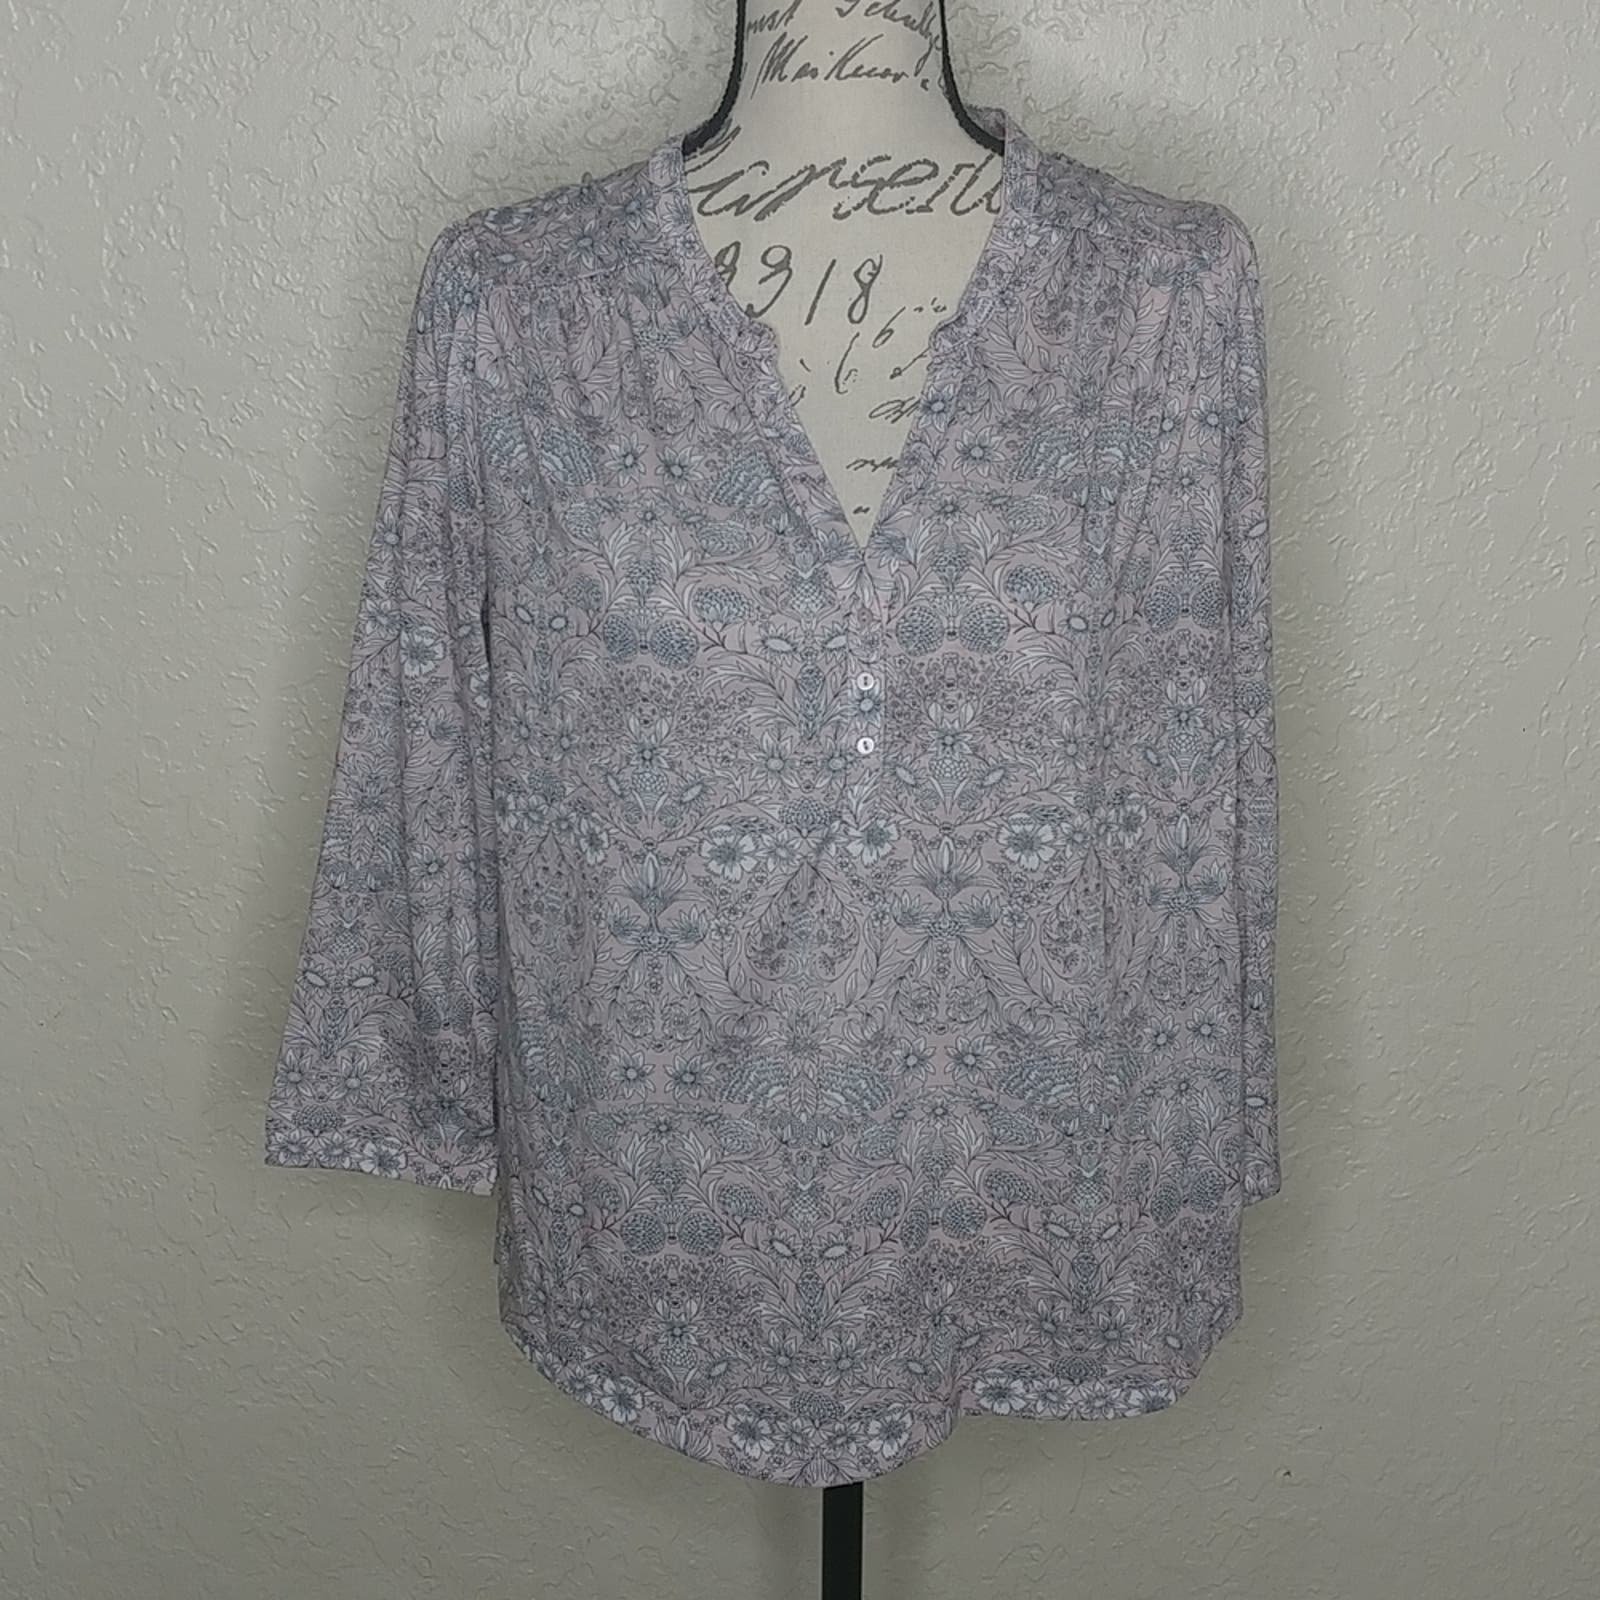 Amazing H&M Floral Top Size M fkBDpCCEY Fashion